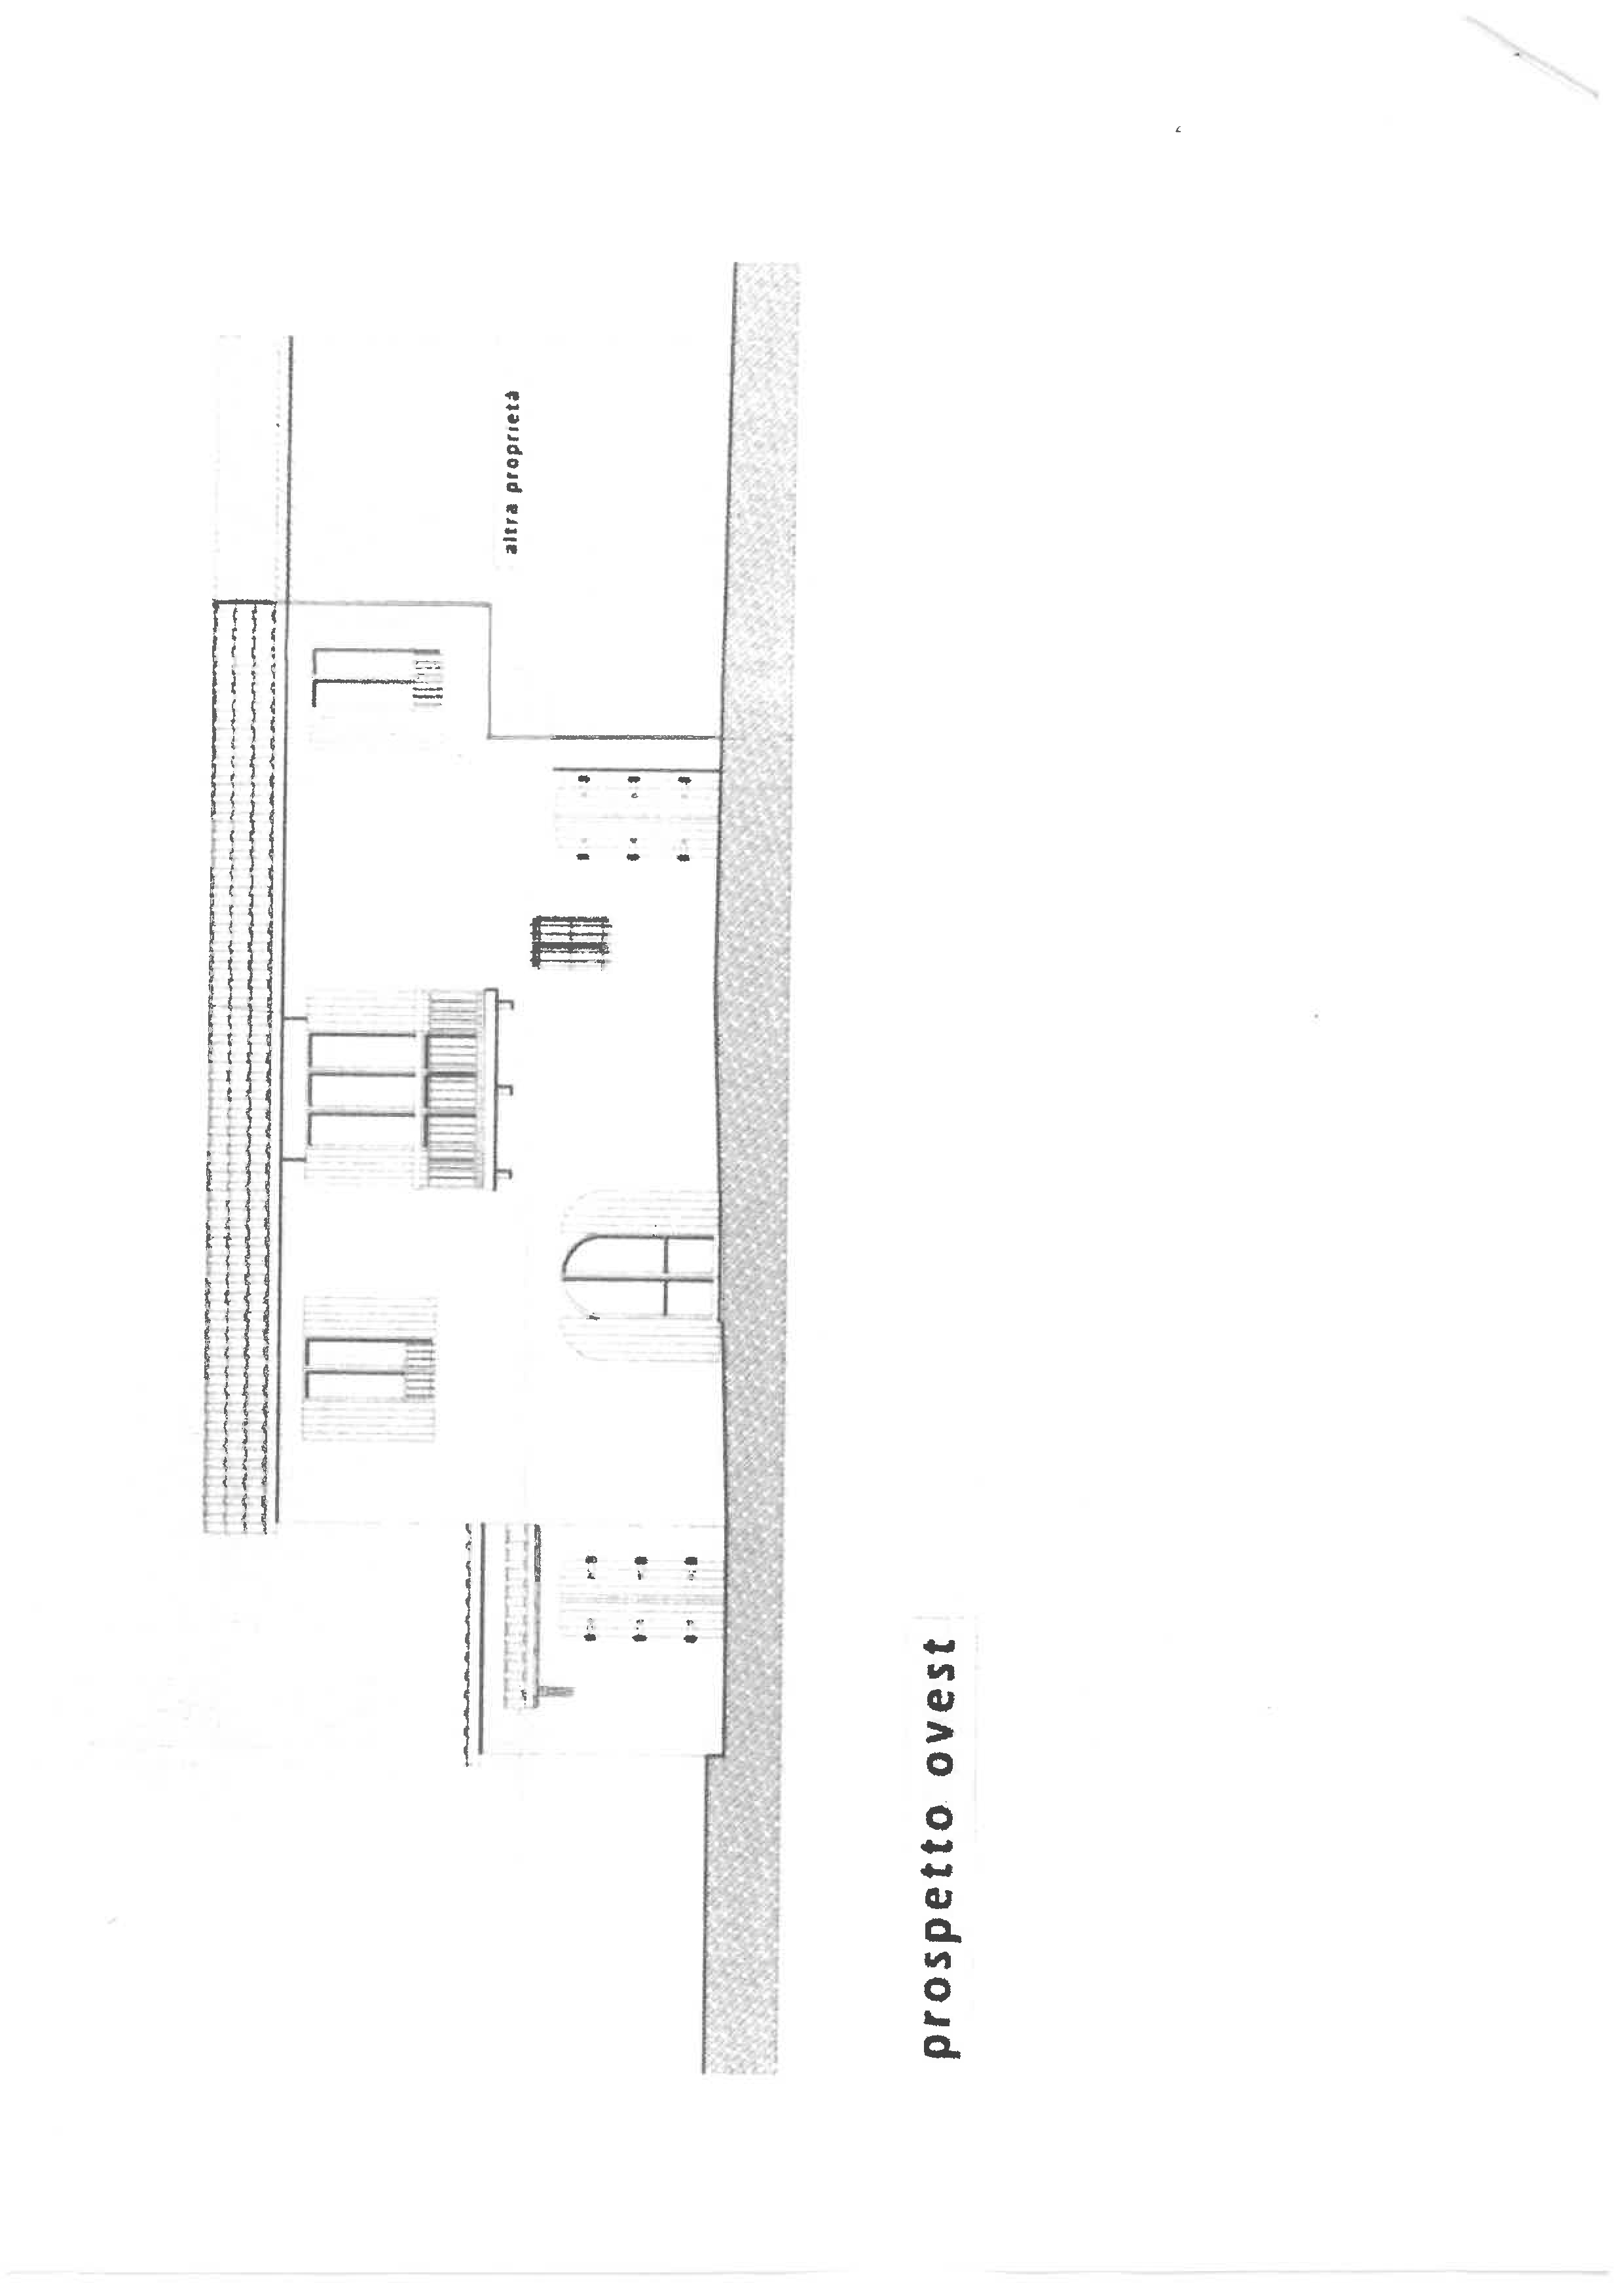 Plan 6/6 for ref. E028M